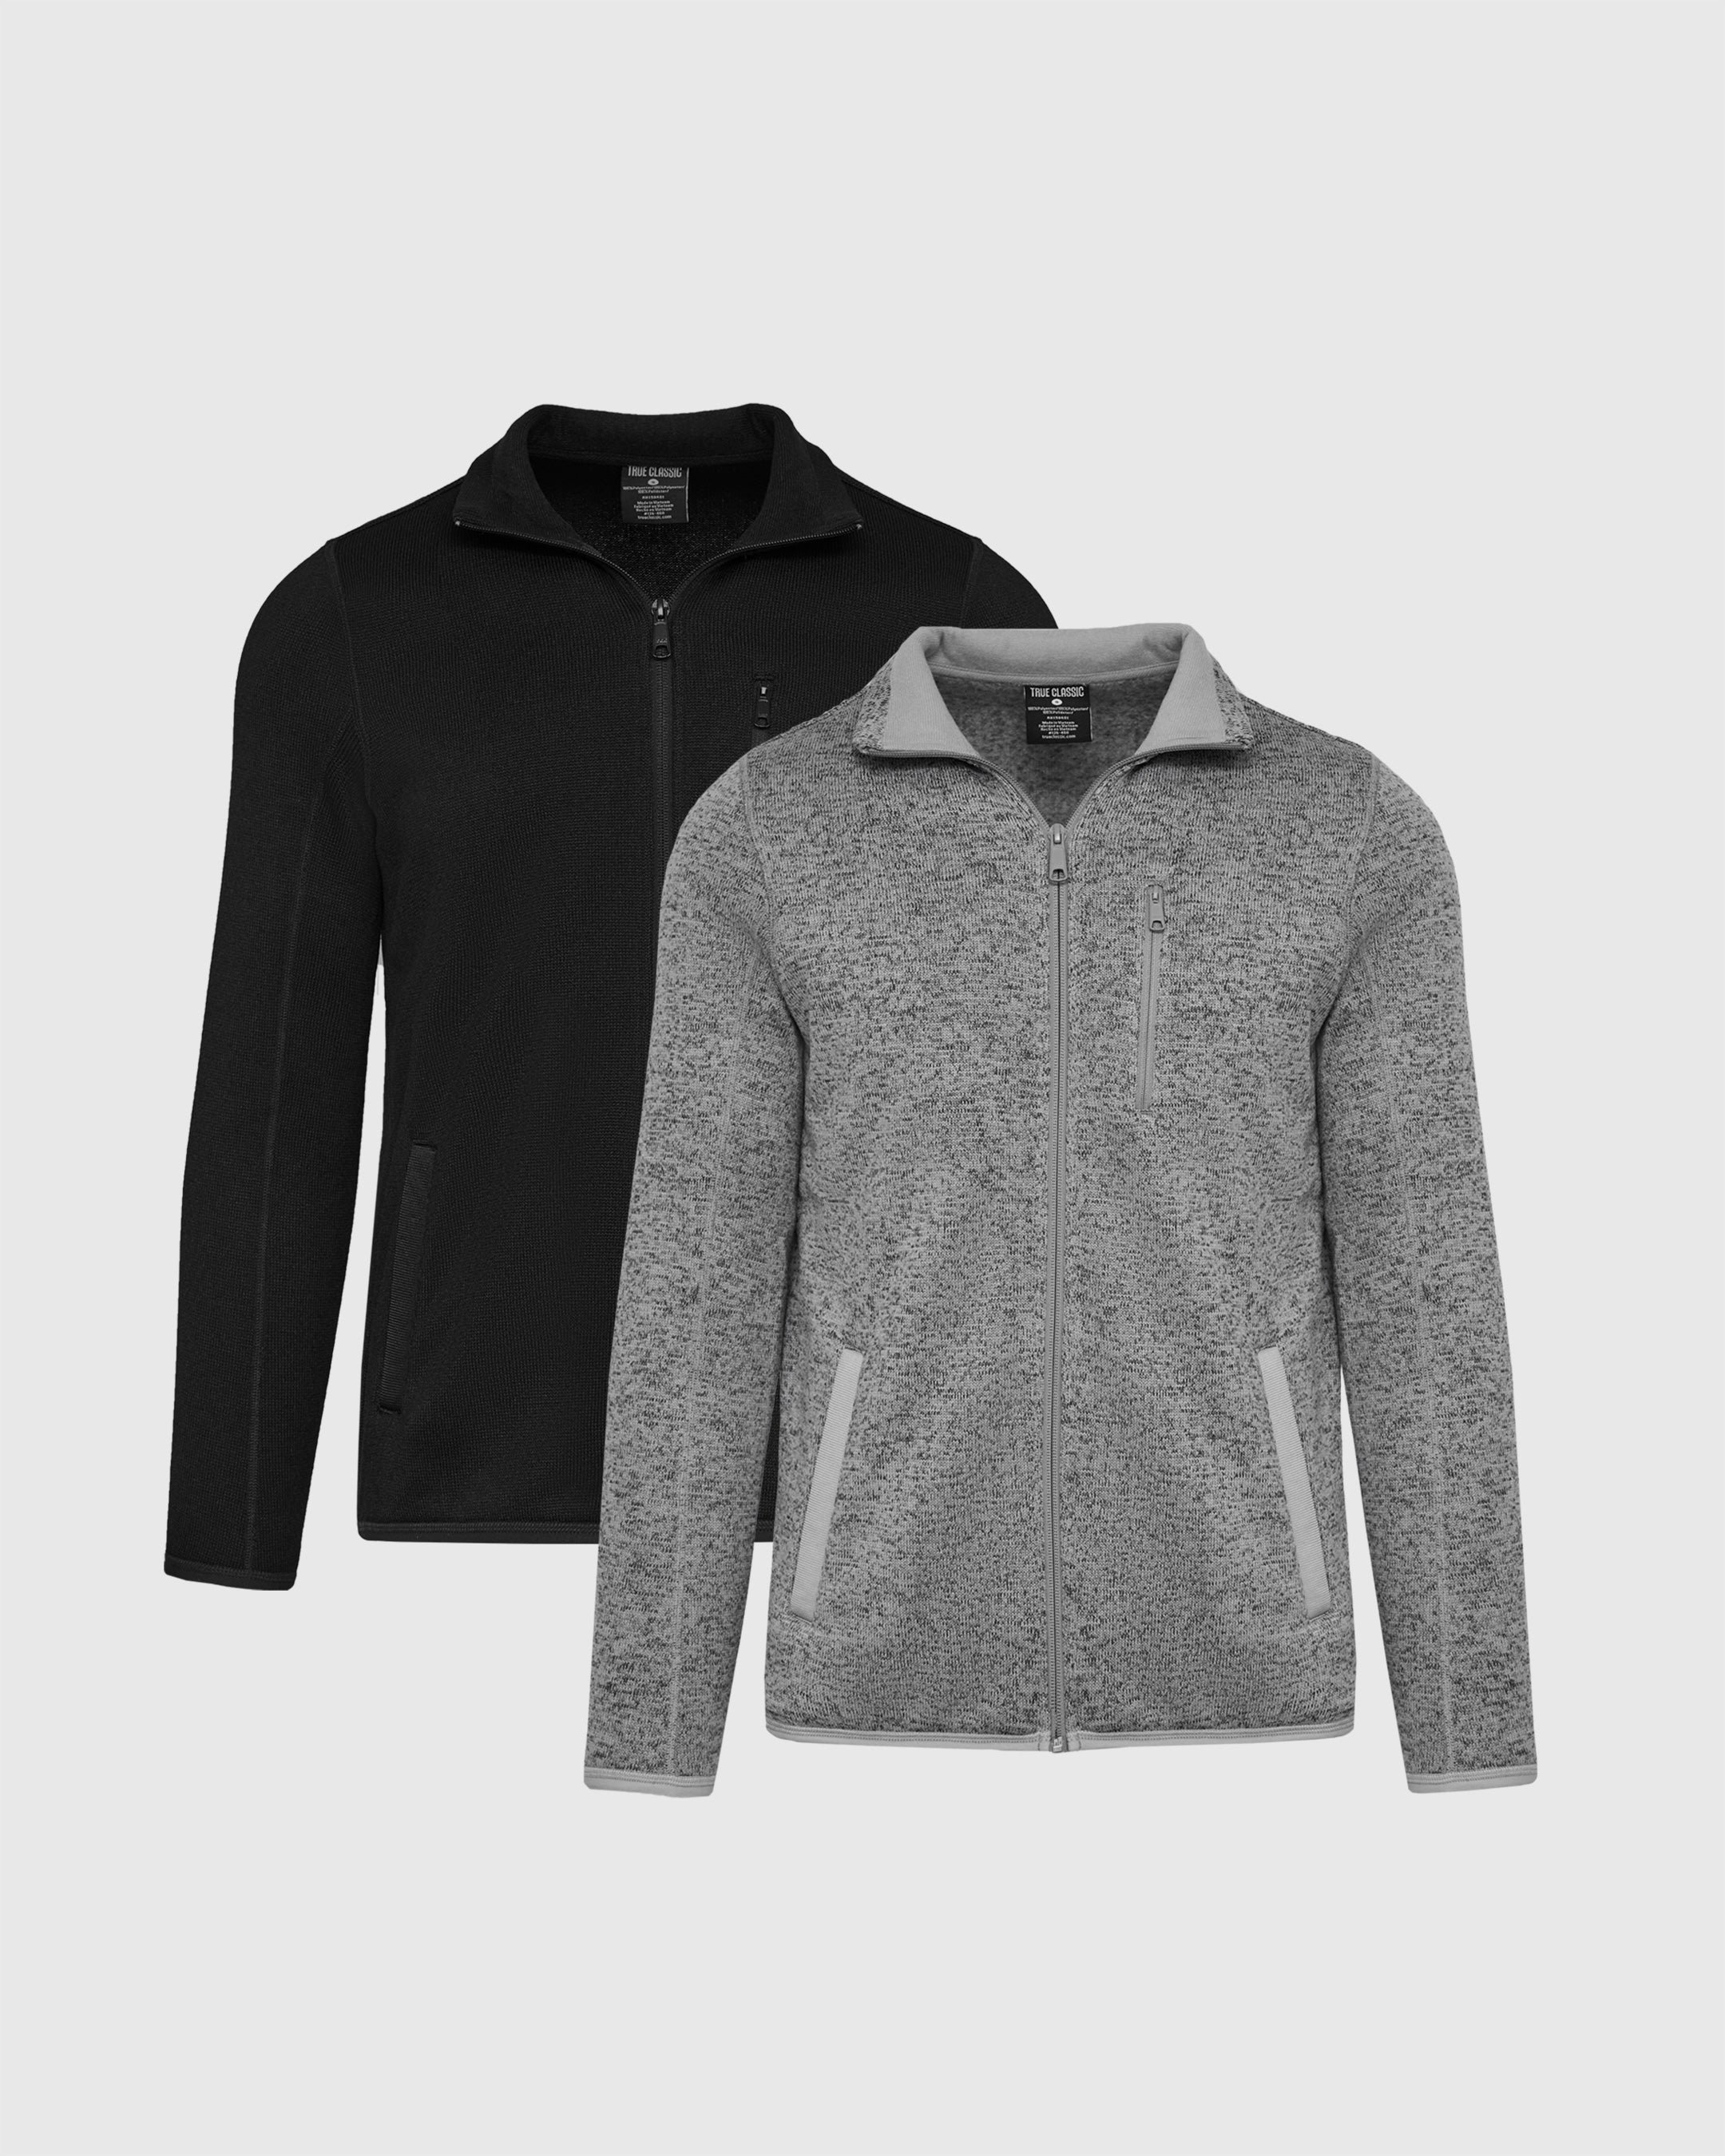 Black and Gray Sweater Fleece Jacket 2-Pack